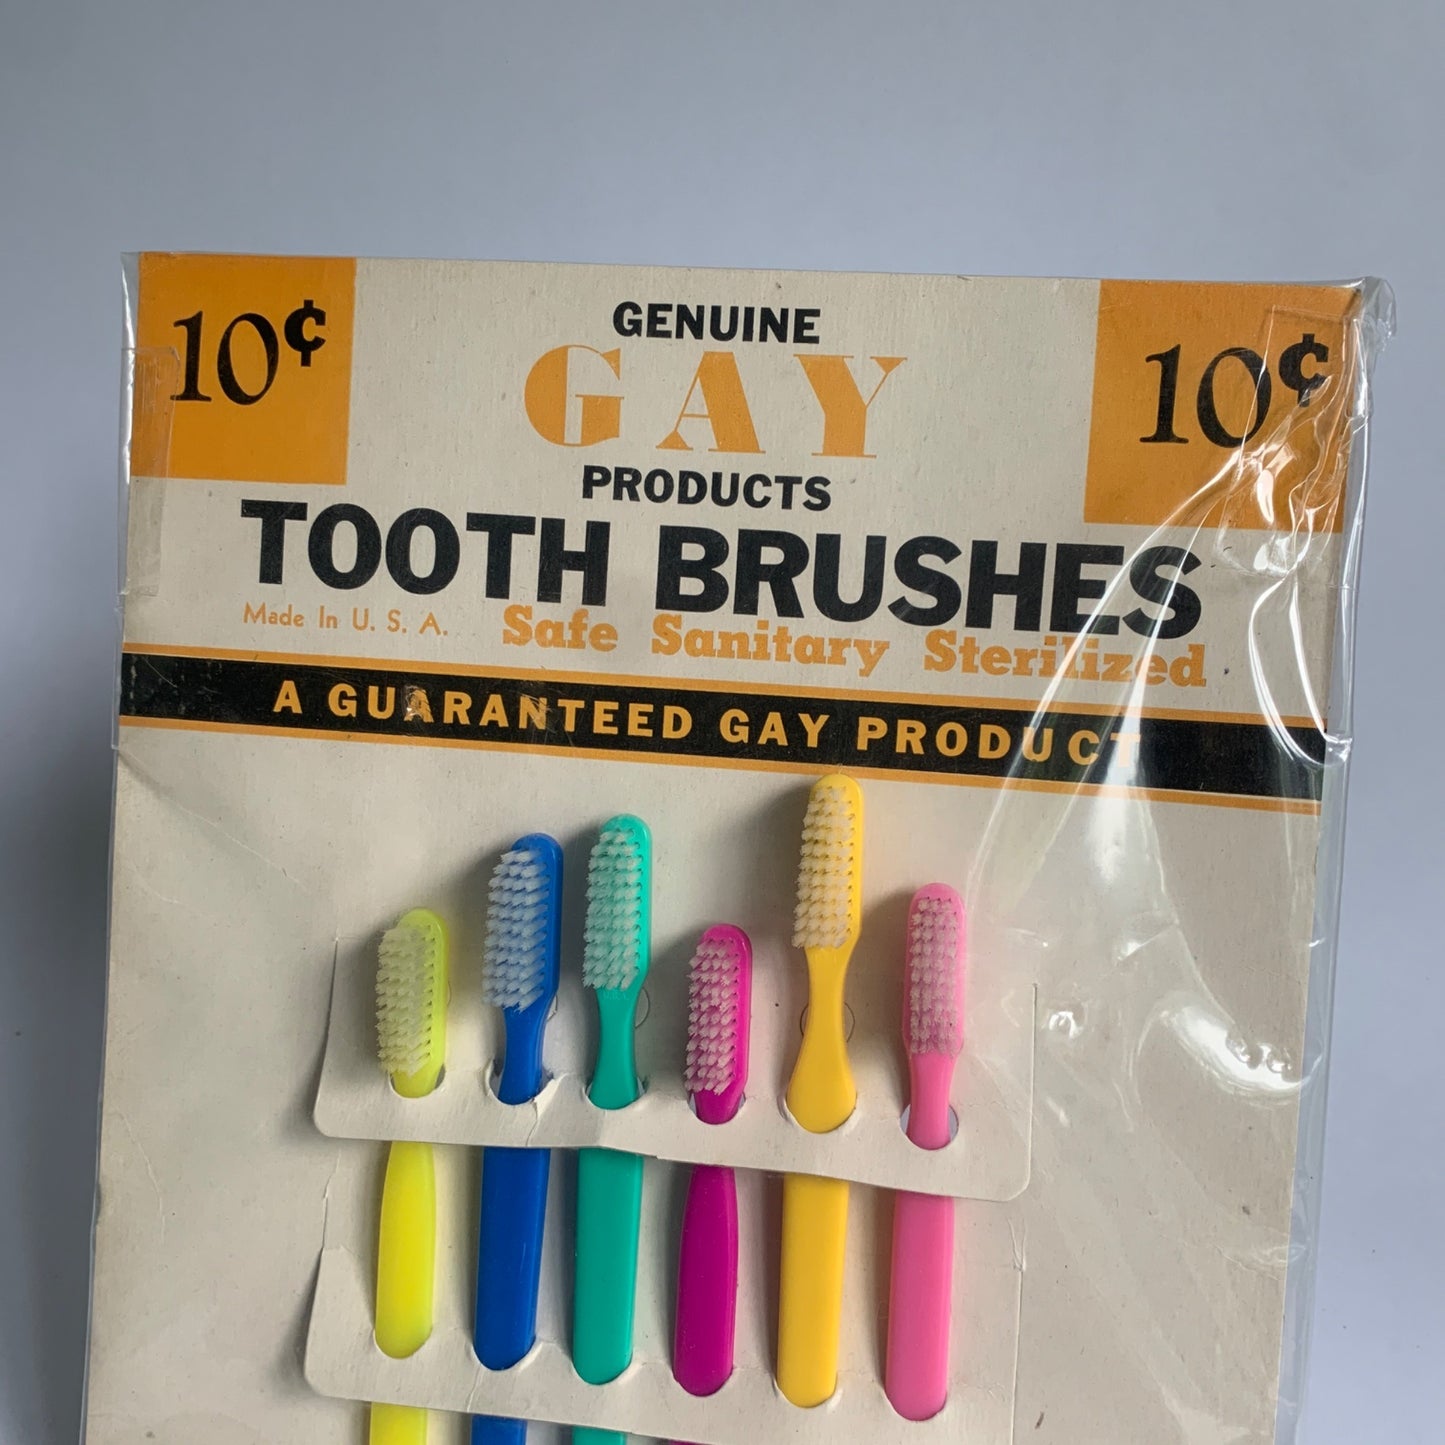 Genuine Gay Products Tooth Brushes Store Display Set of 6 Vintage New